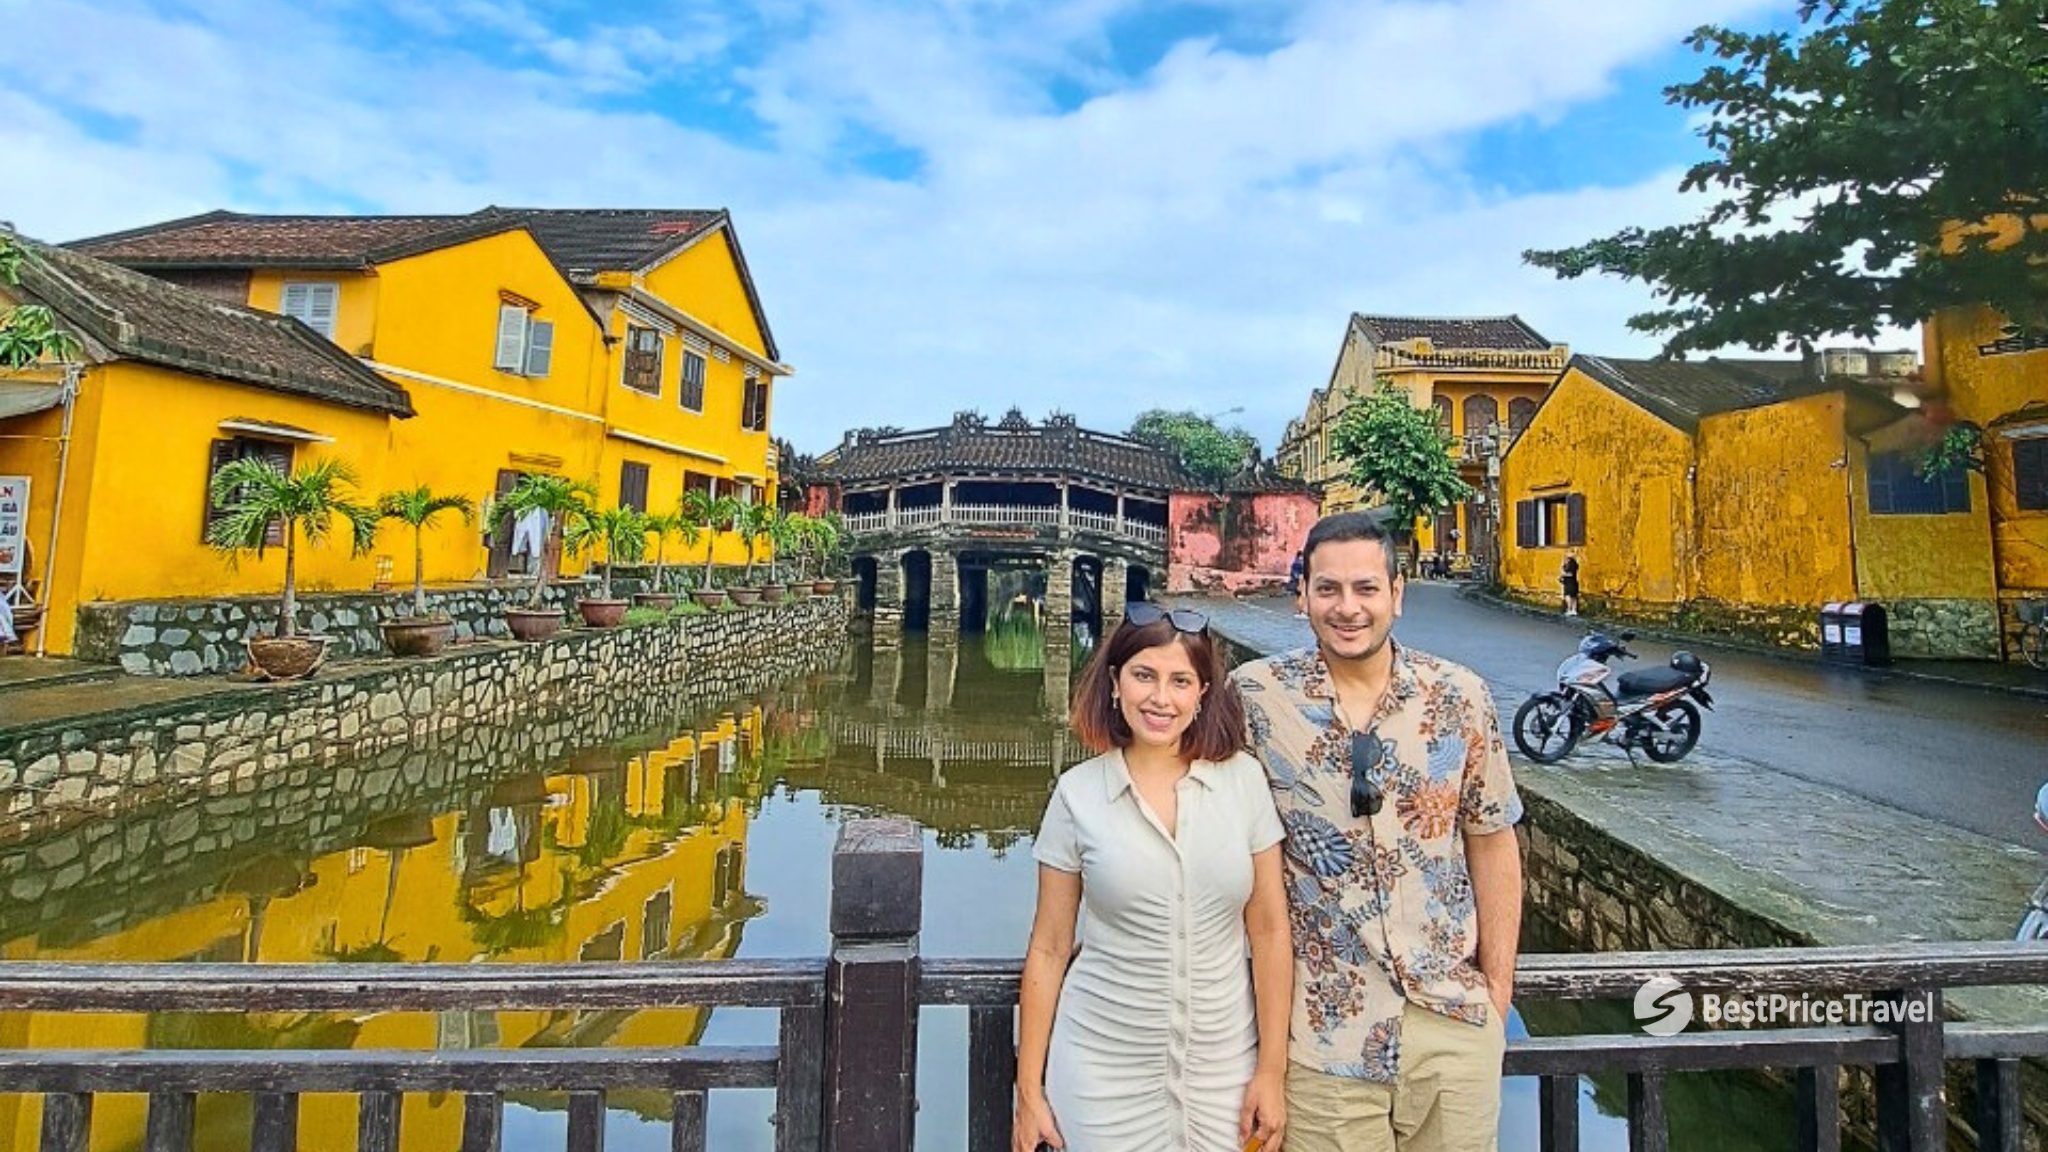 Hoi An Ancient Town Is A Popular Destination For Tourists Who Wish To Experience Its Timeless Charm